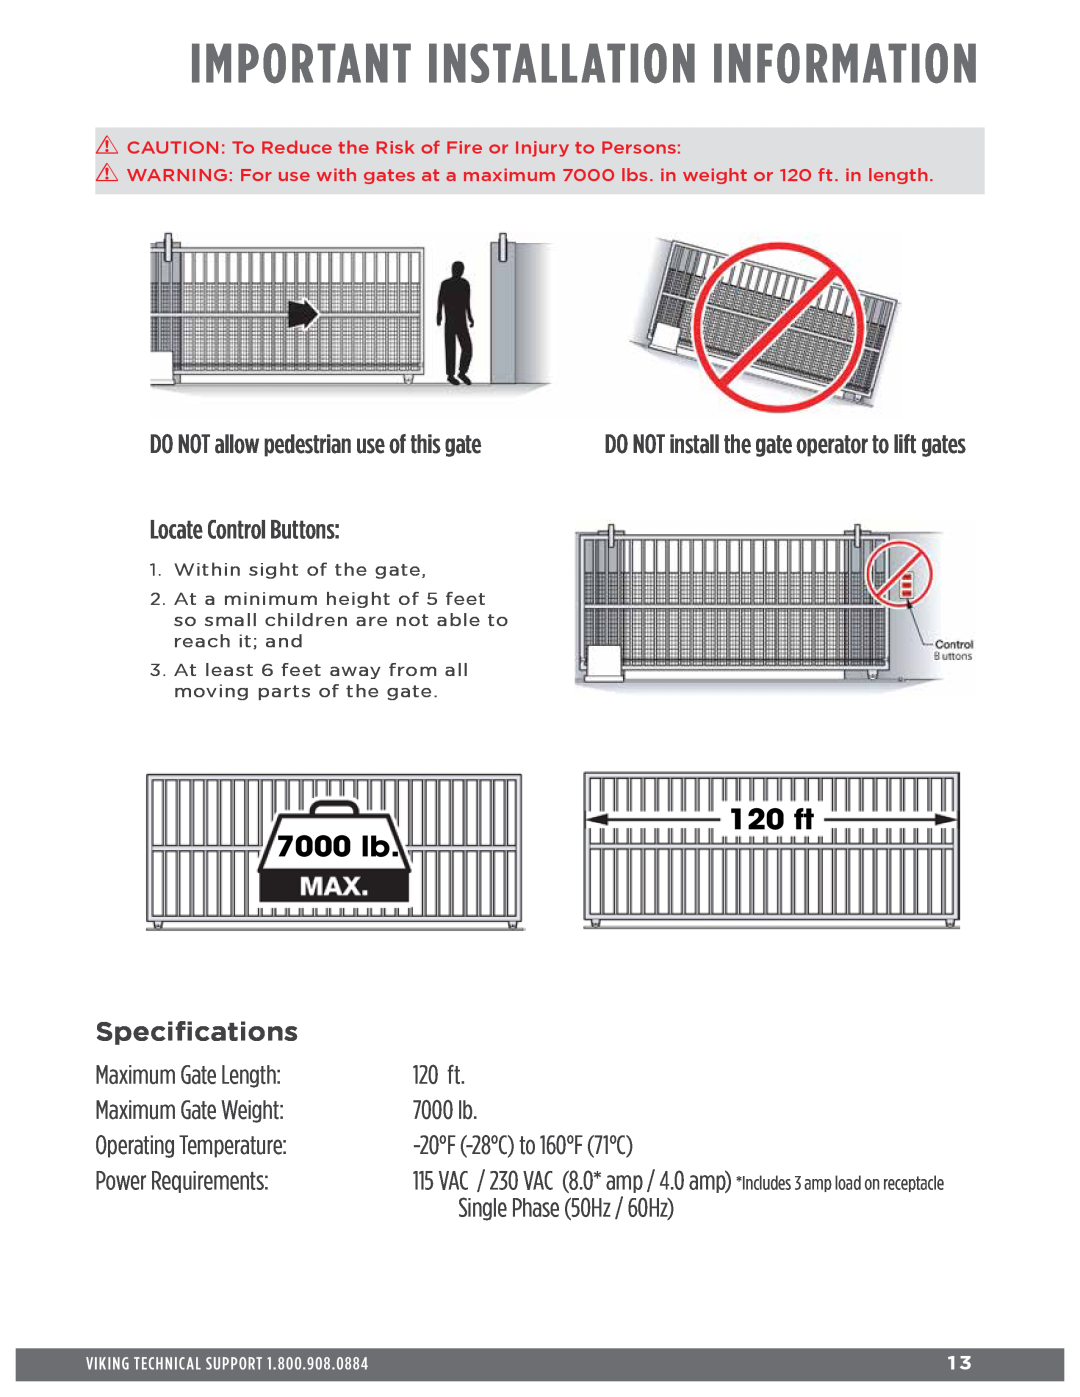 Viking Access Systems Q7 Important Installation Information, Locate Control Buttons, Specifications, Maximum Gate Length 